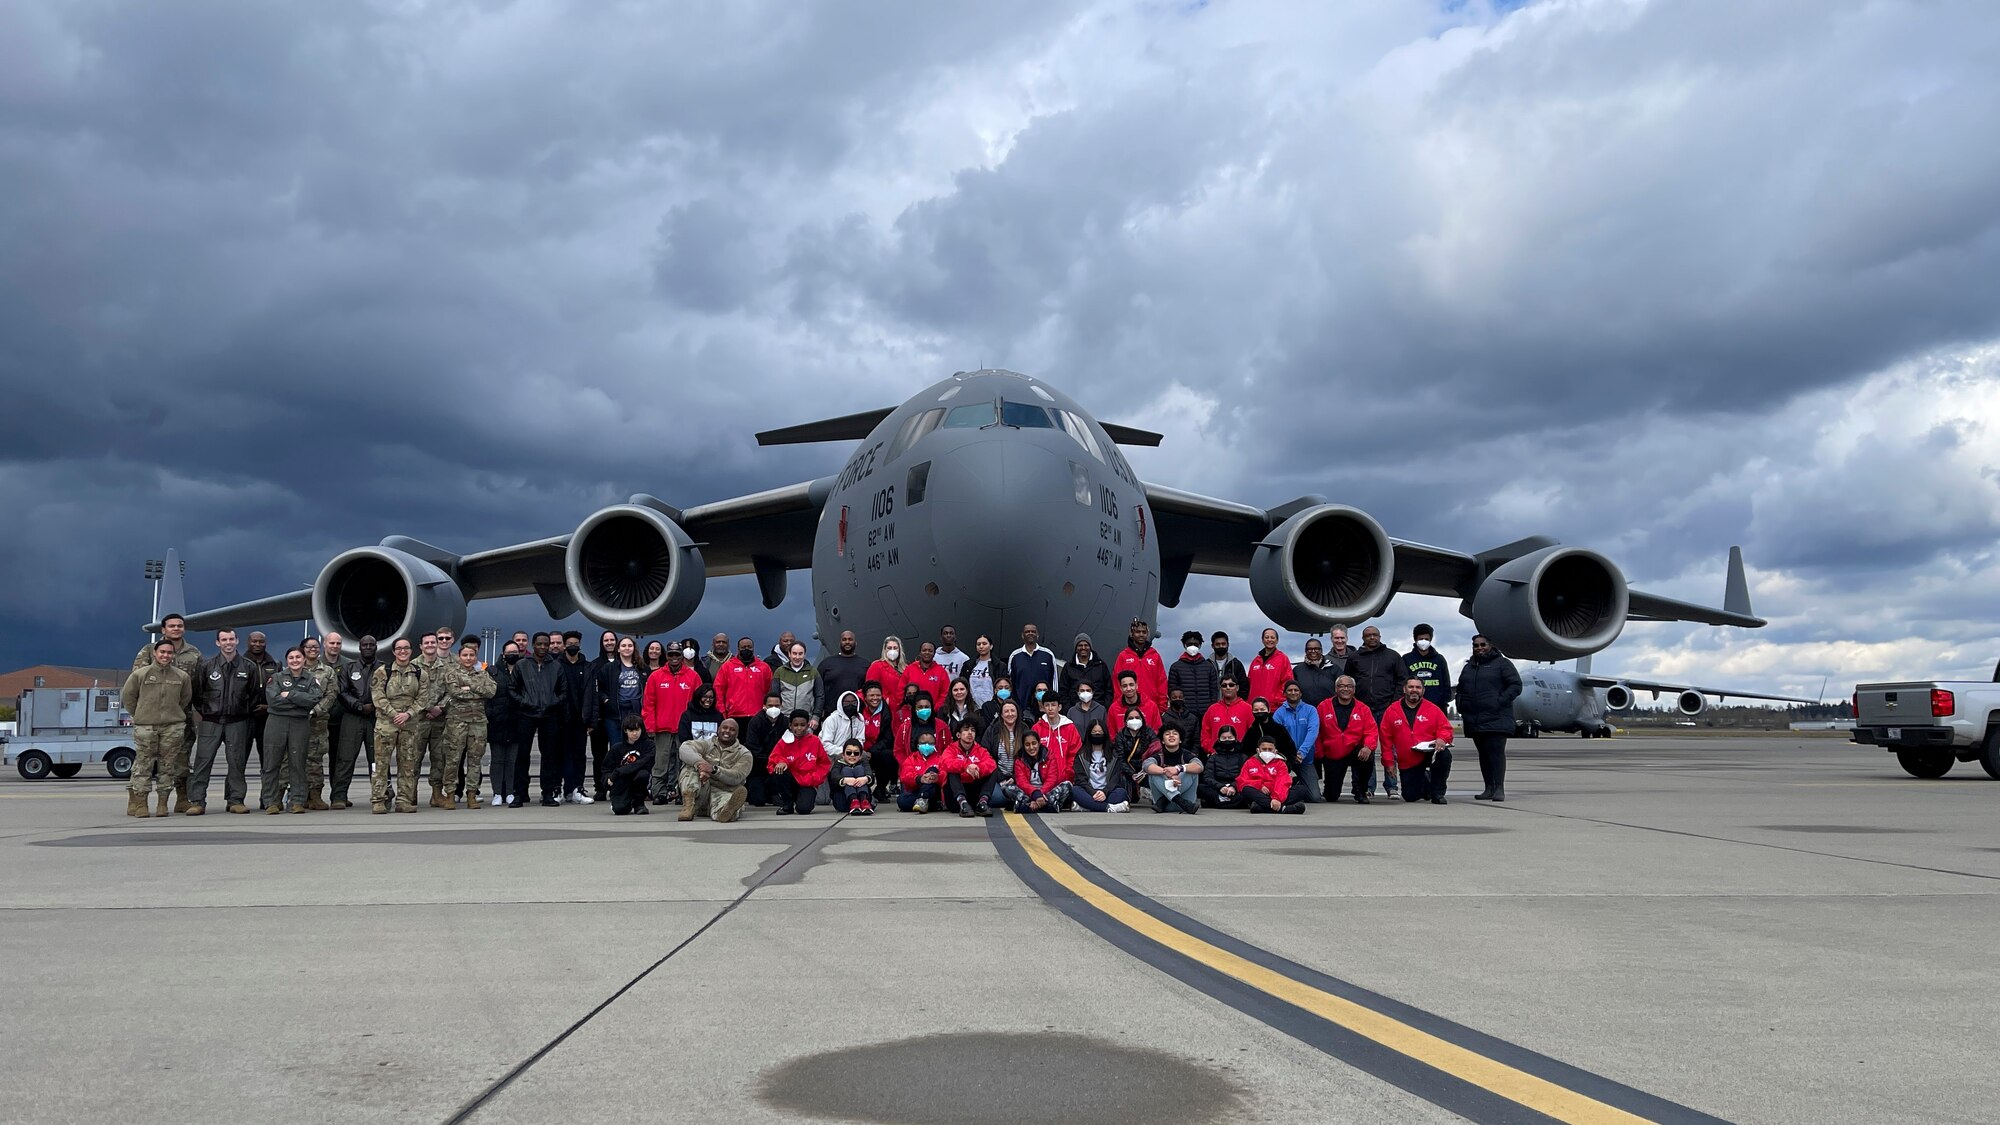 Members of the Red-Tailed Hawks Youth Program pose for a photo in front of a C-17 Globemaster III during the Aviation Inspiration and Mentorship (AIM) Wing event at Joint Base Lewis-McChord, Washington, April 16, 2022. AIM Wing is an community outreach program with a mission to inform, influence and inspire the next generation of Air Force aviators. (U.S. Air Force photo by Airman 1st Class Charles Casner)